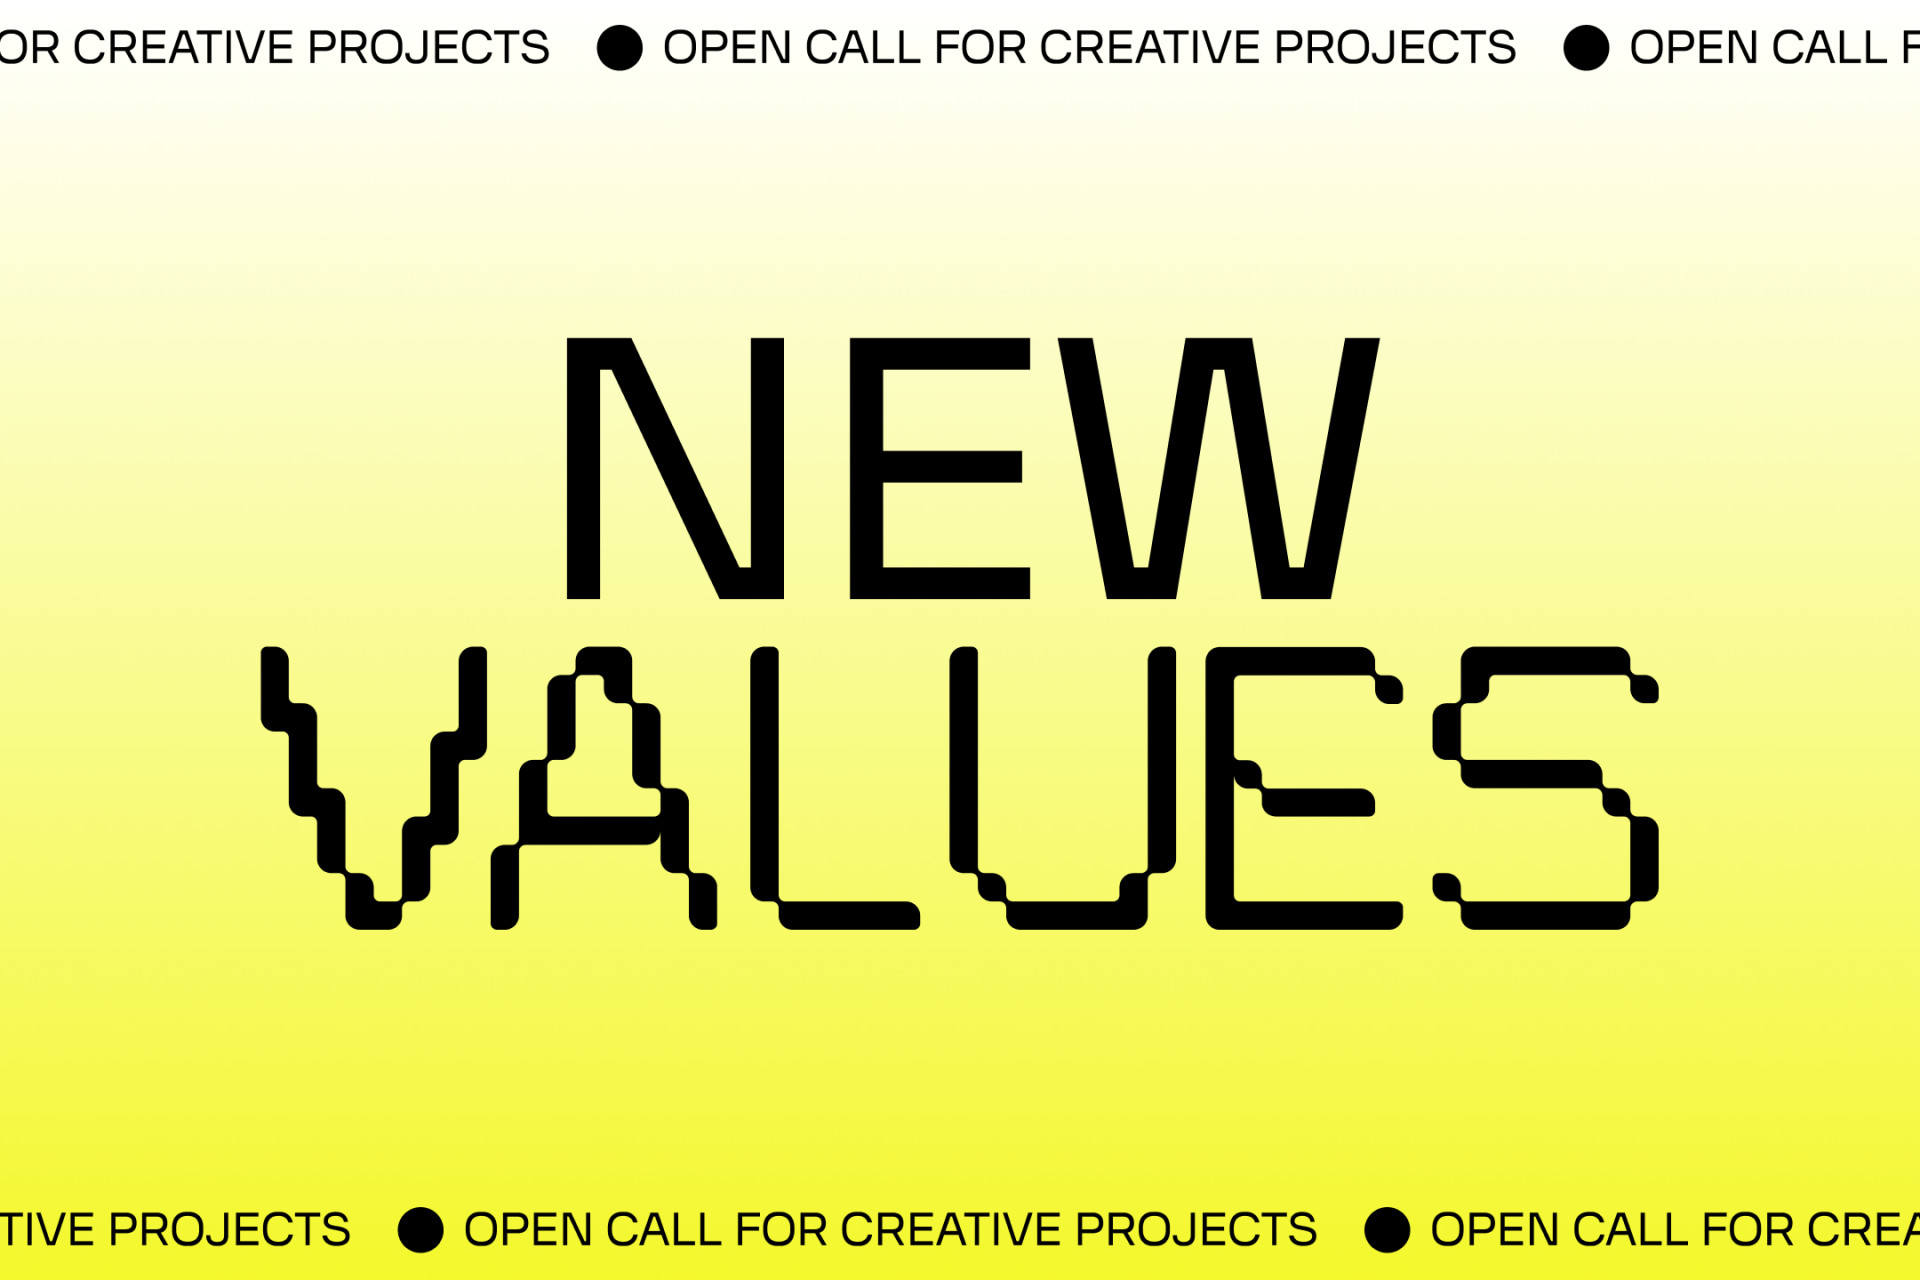 NEW VALUES for a new creative economy